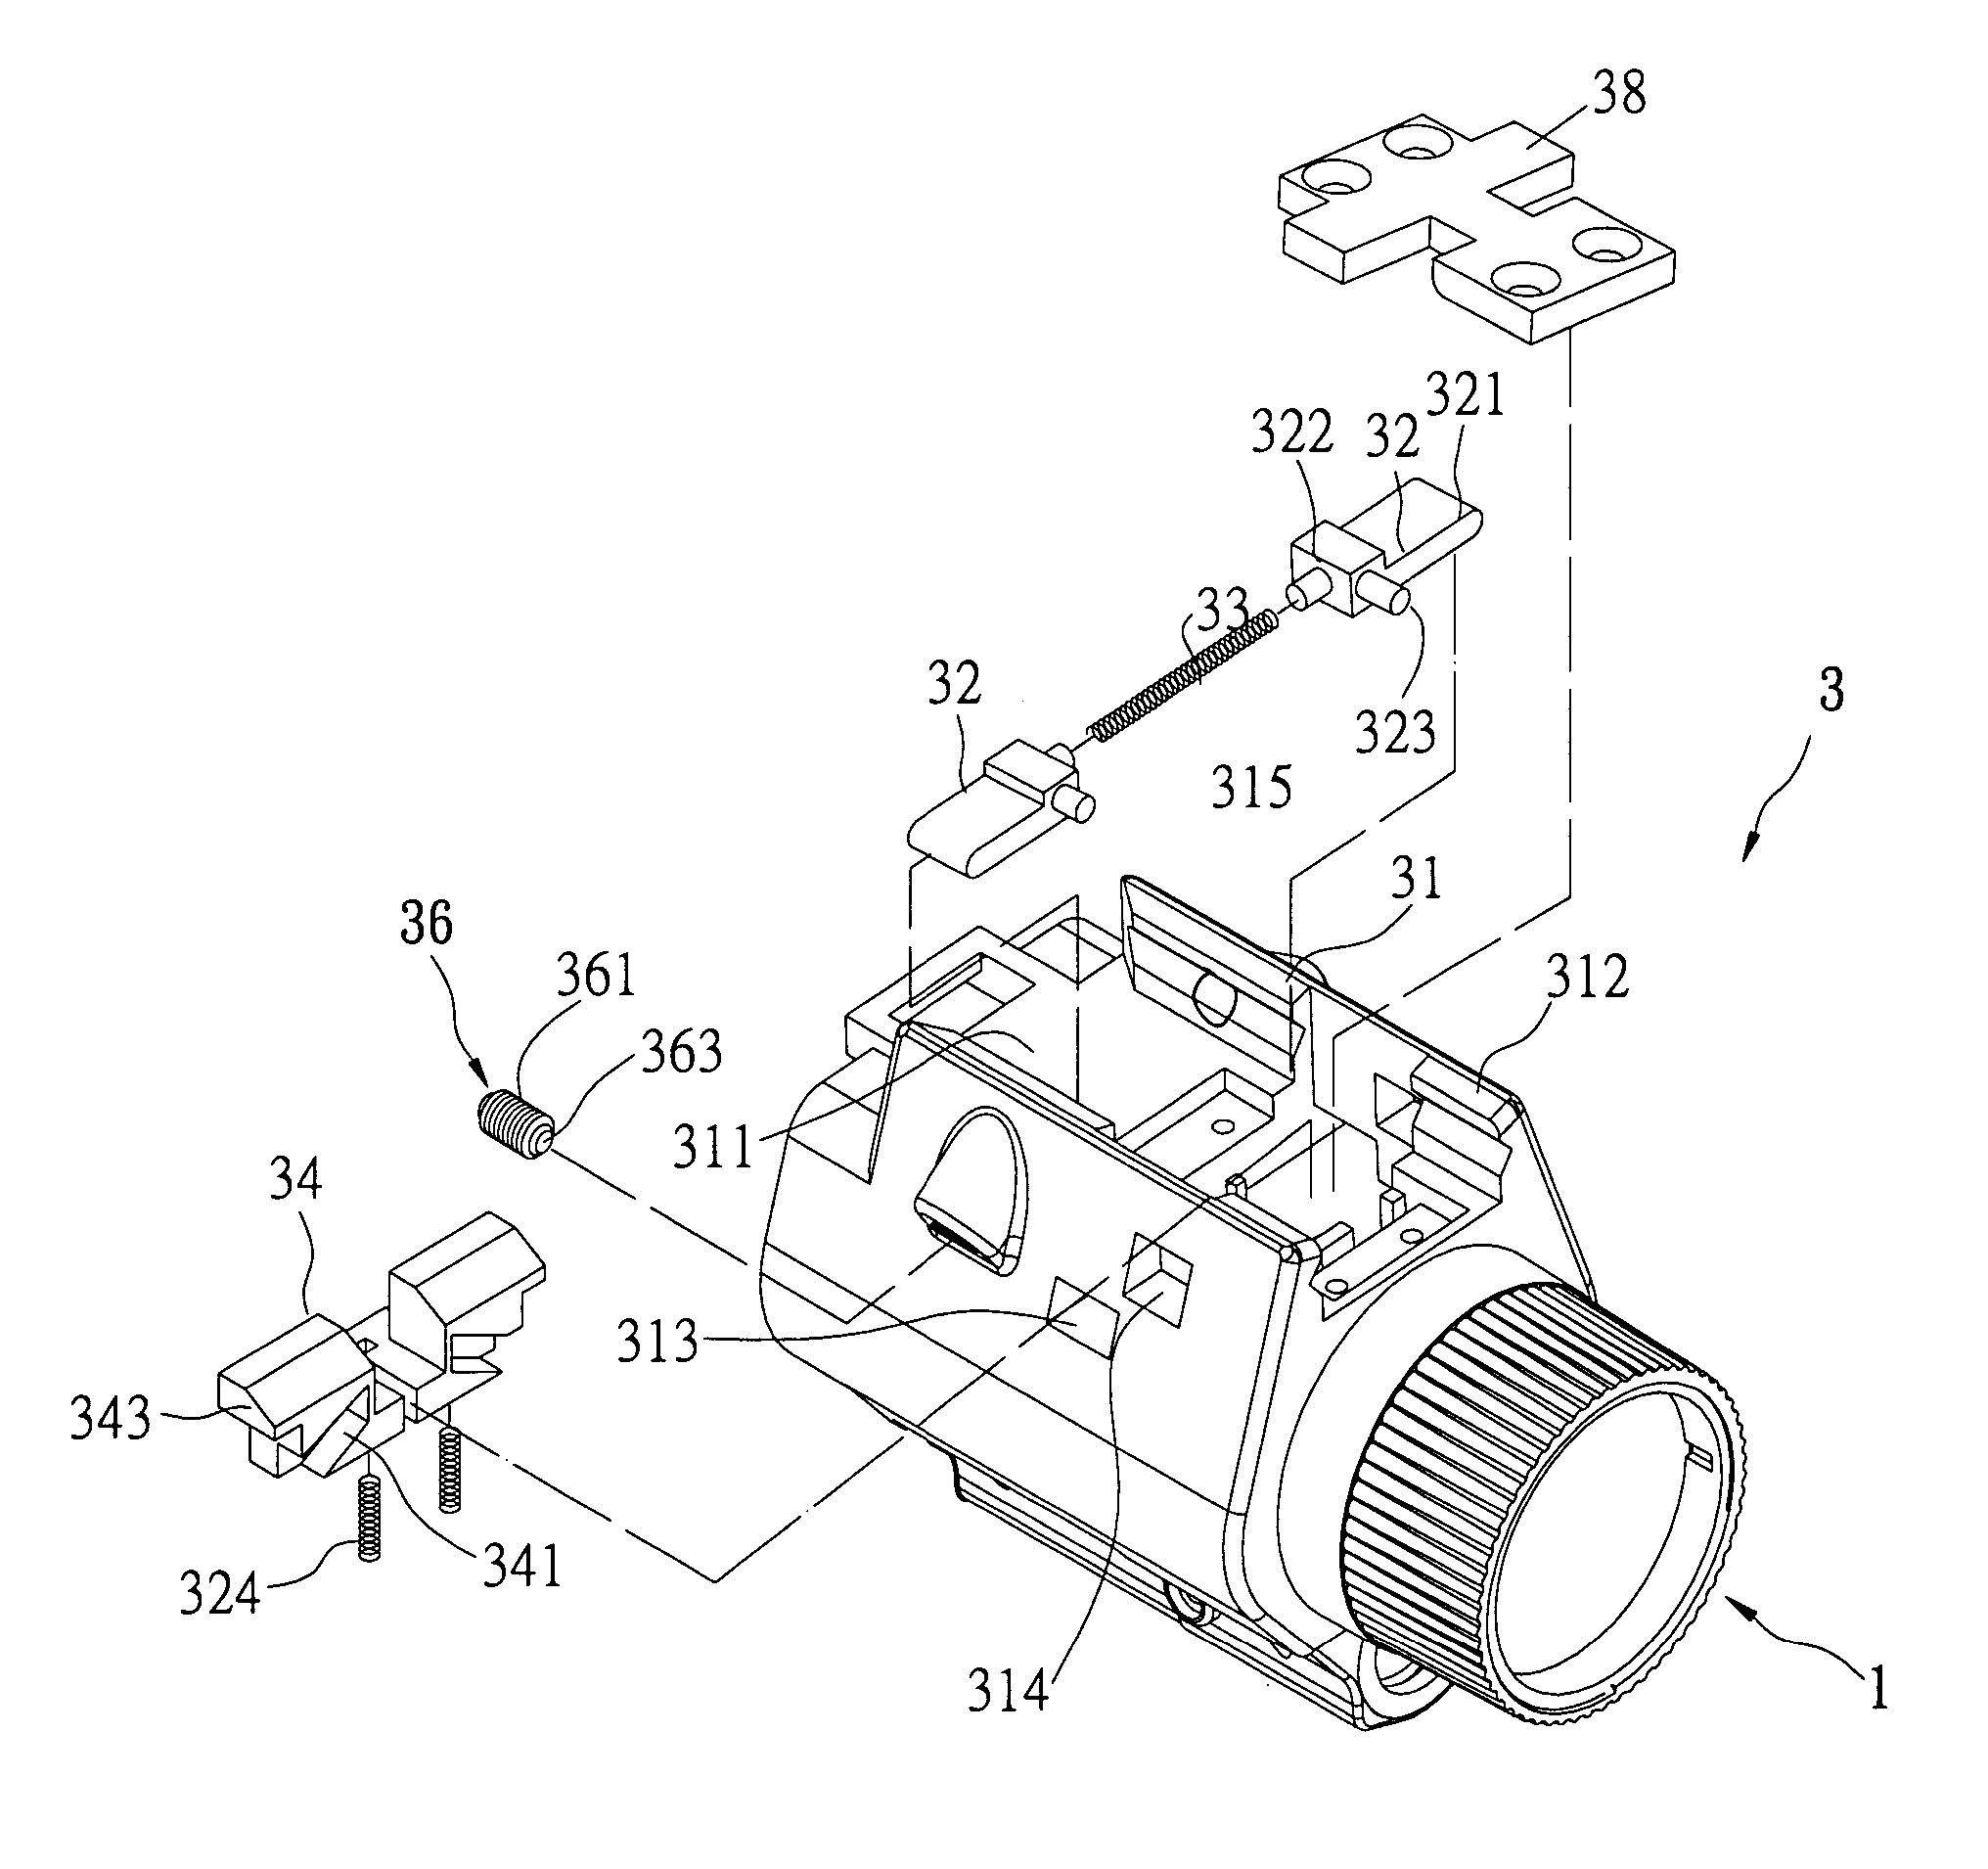 Gun barrel and trigger flashlight and/or laser mount structure